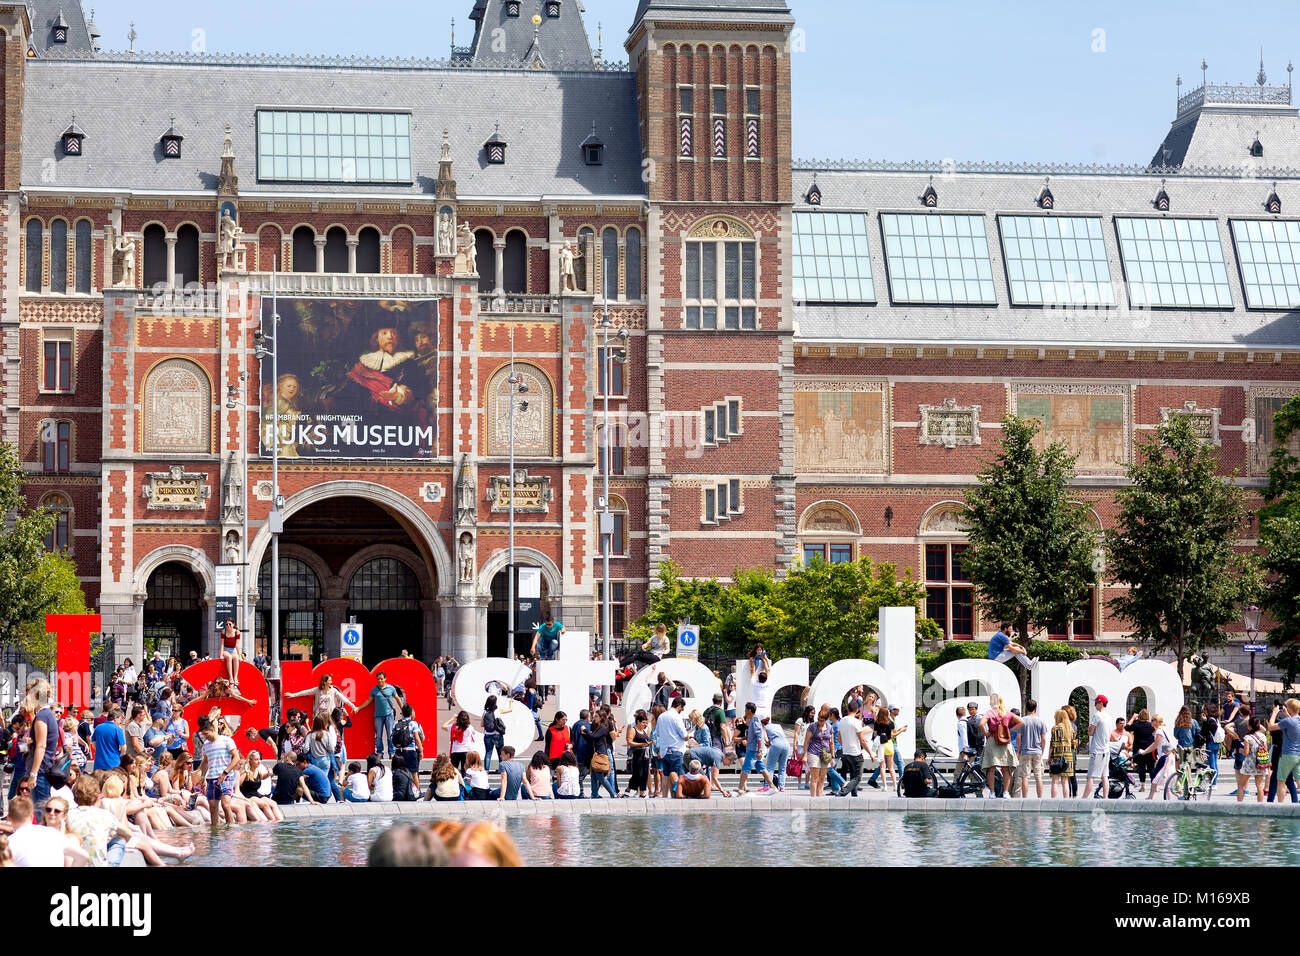 People relaxing and having fun on a waem sunny day near the Rijks Museum building, Amsterdam, Netherlands Stock Photo